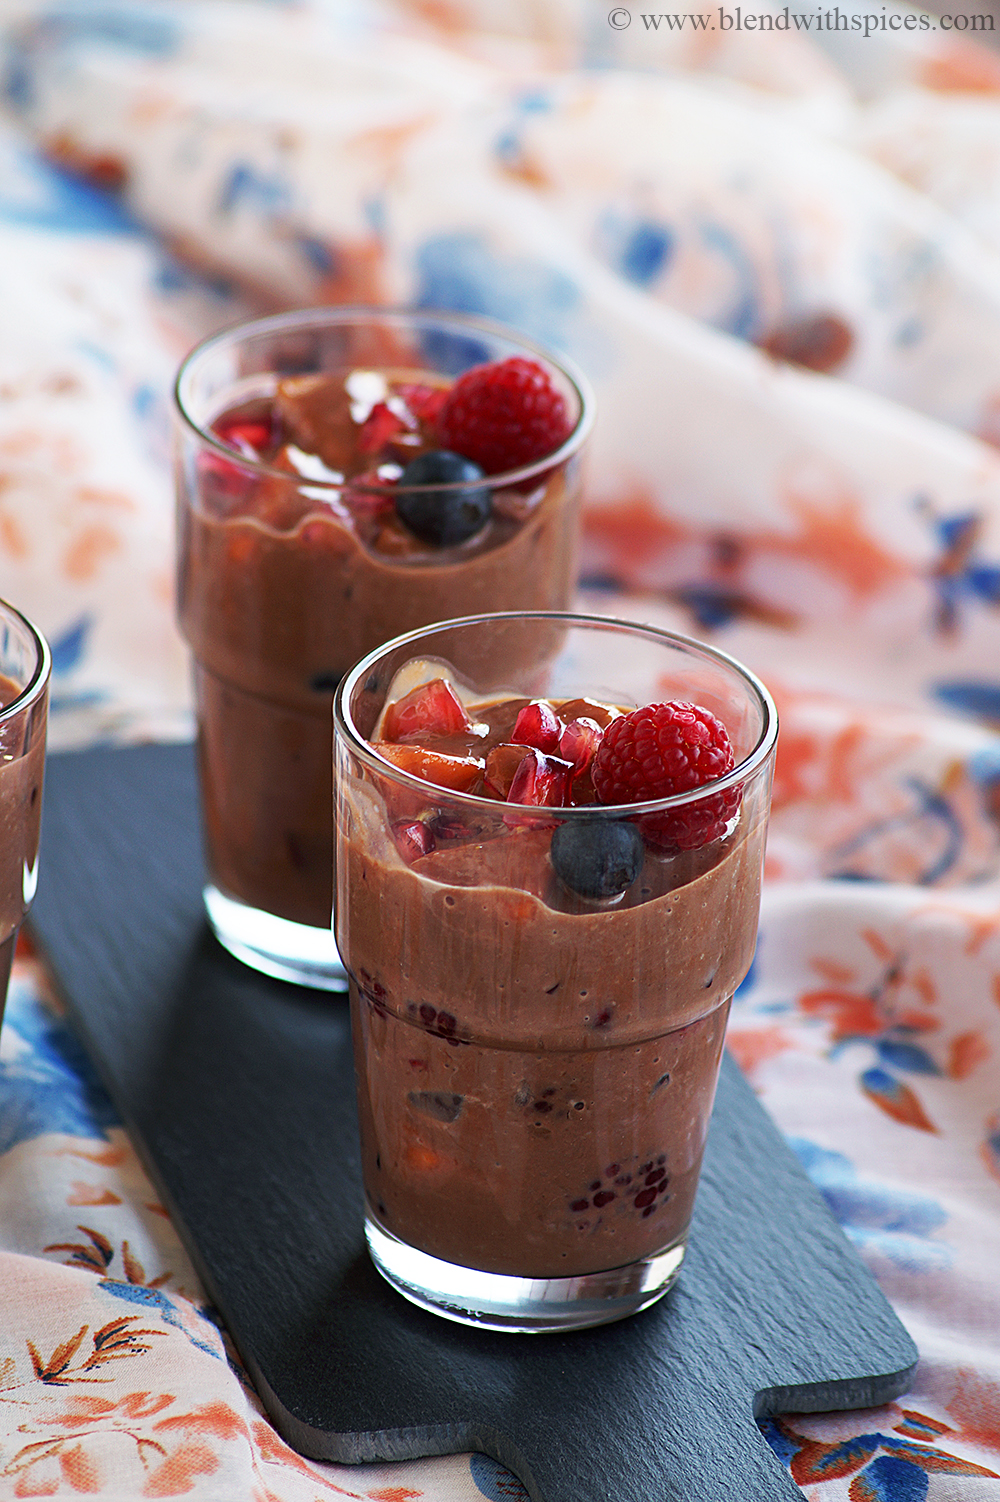 quick and easy chocolate custard recipe with fruits